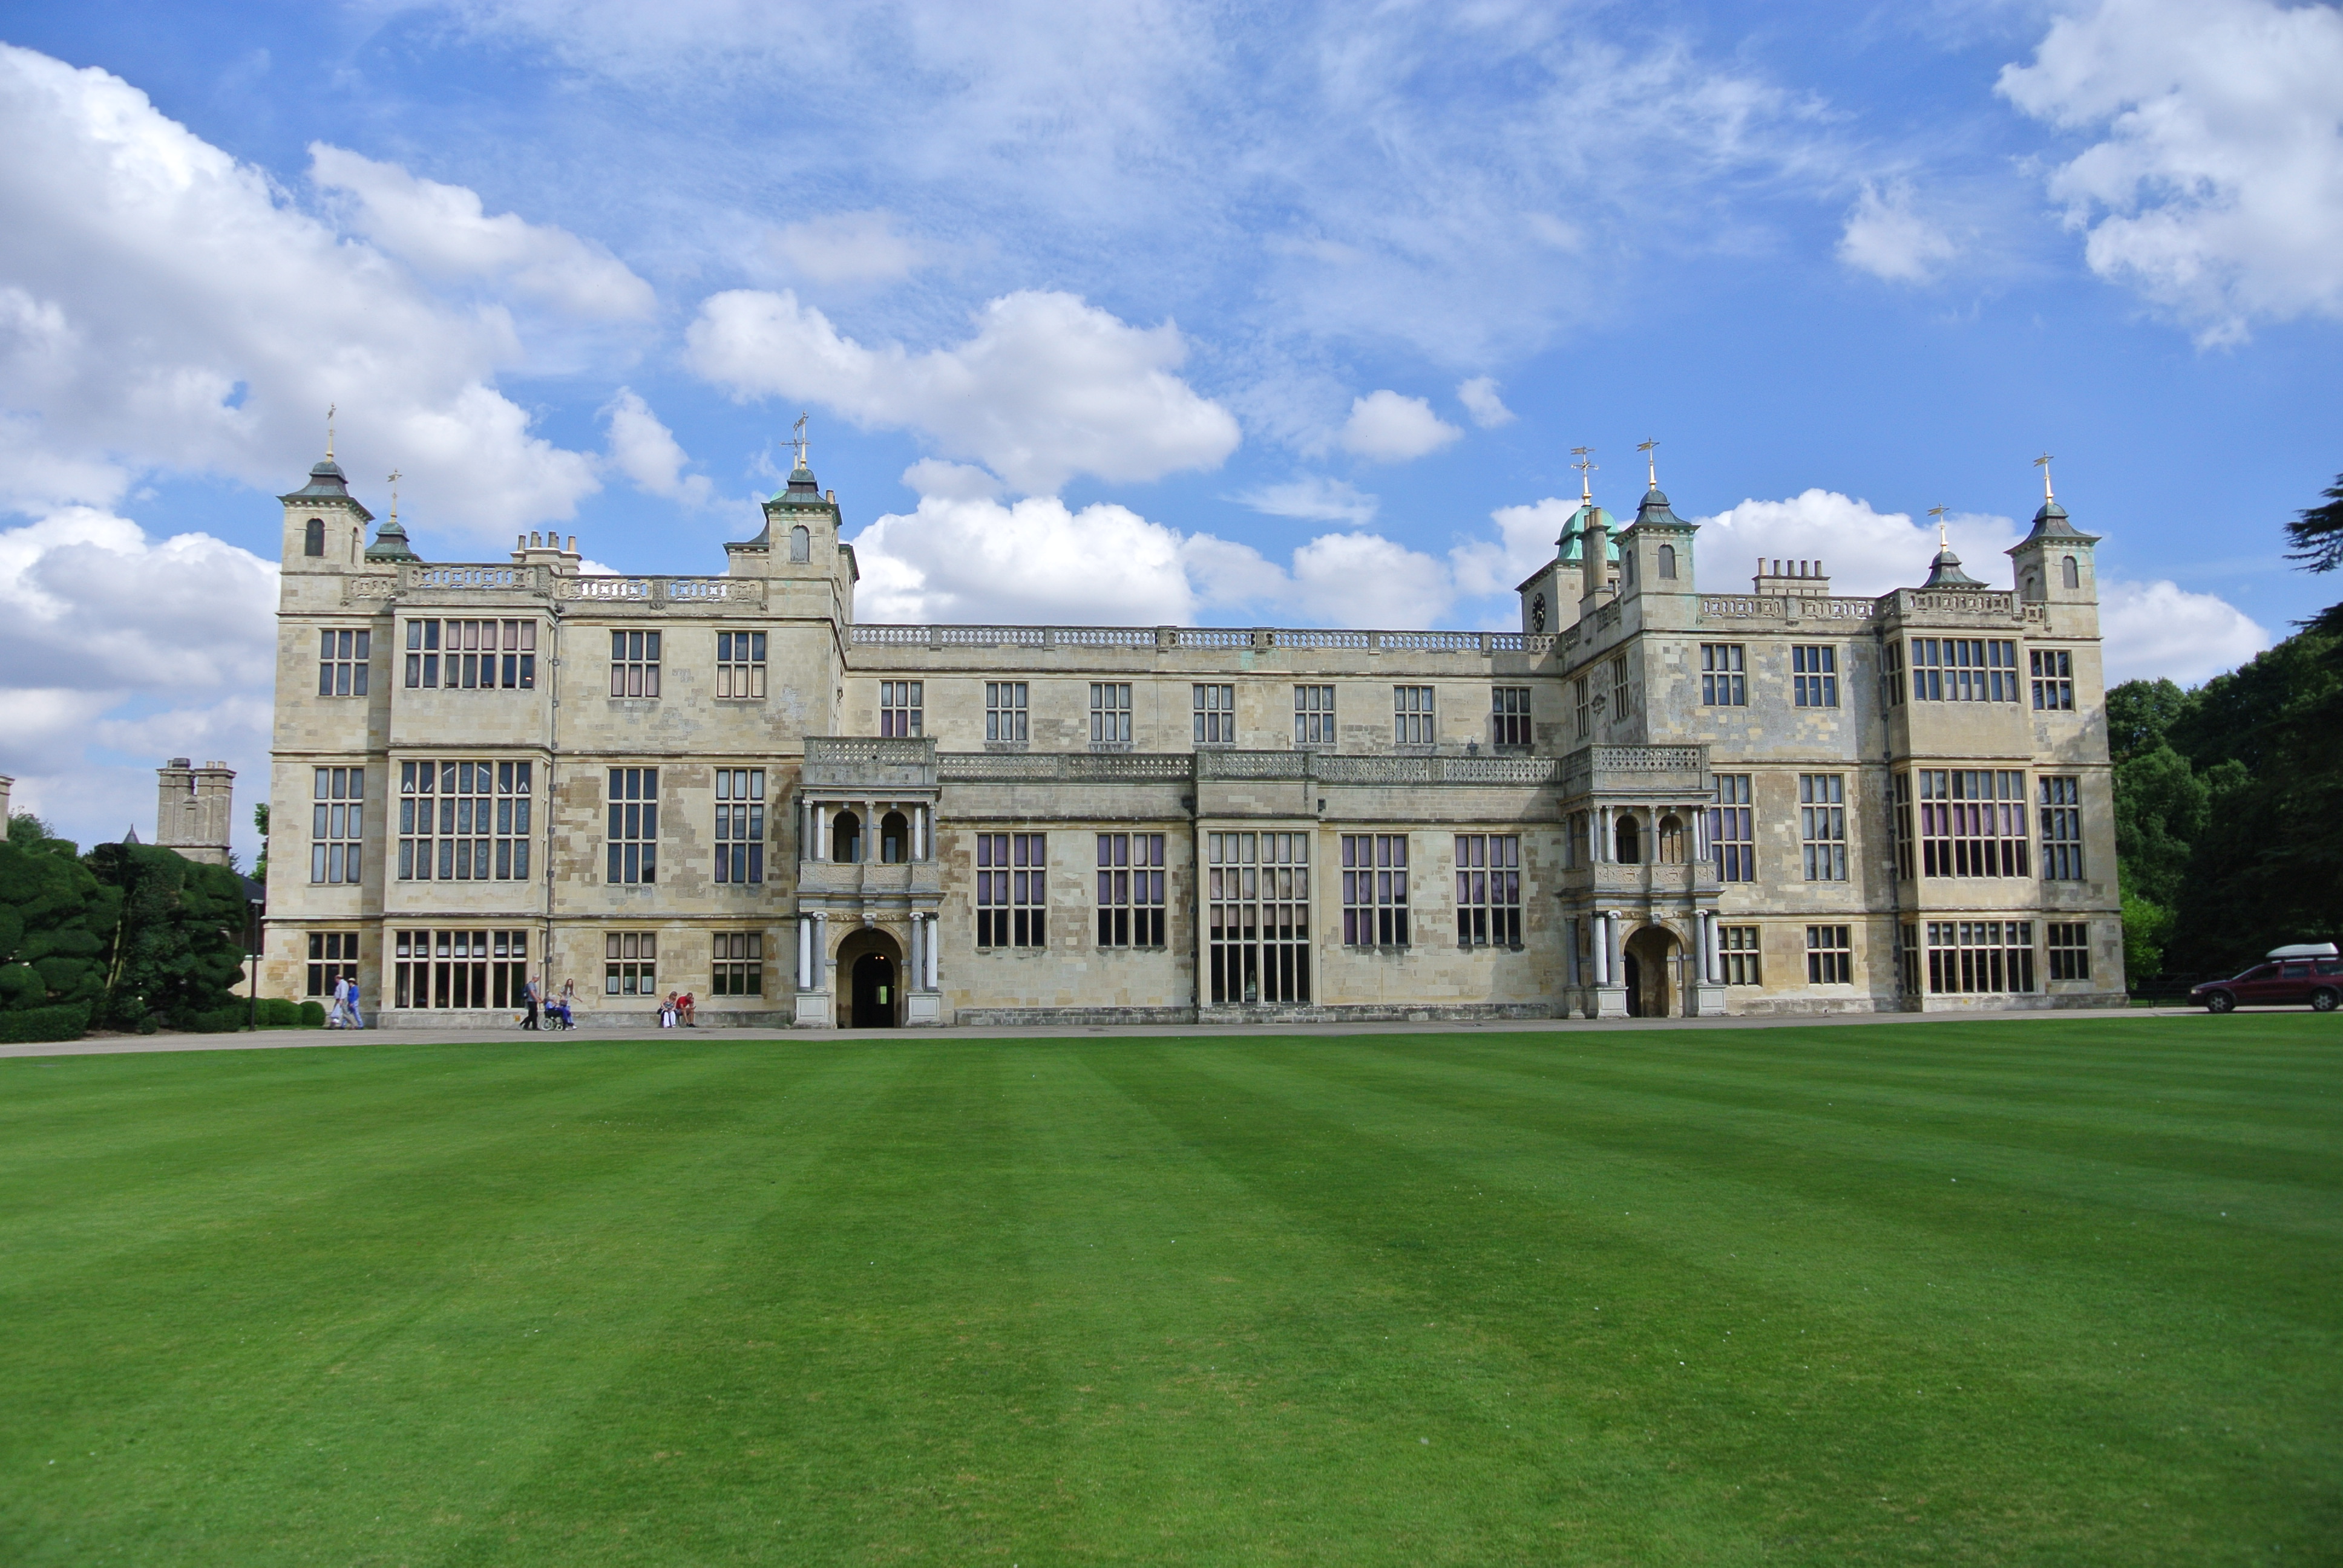 Audley End by Juliamaud